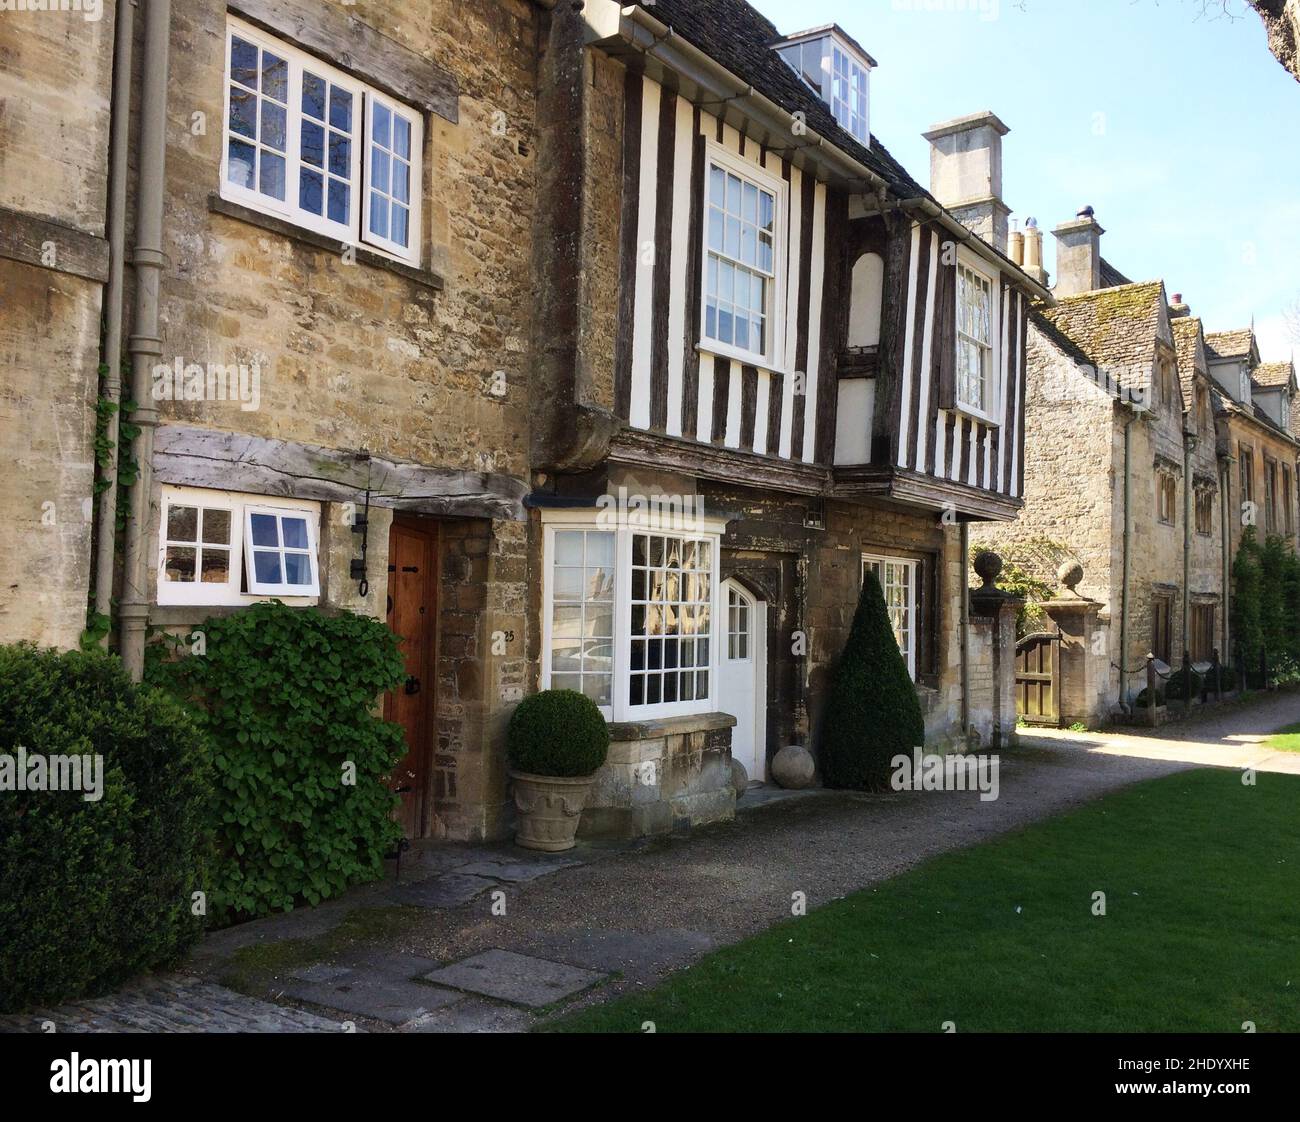 Houses in the Cotswolds town of Burford, UK.  Burford is a town on the River Windrush, in the Cotswold hills. Stock Photo